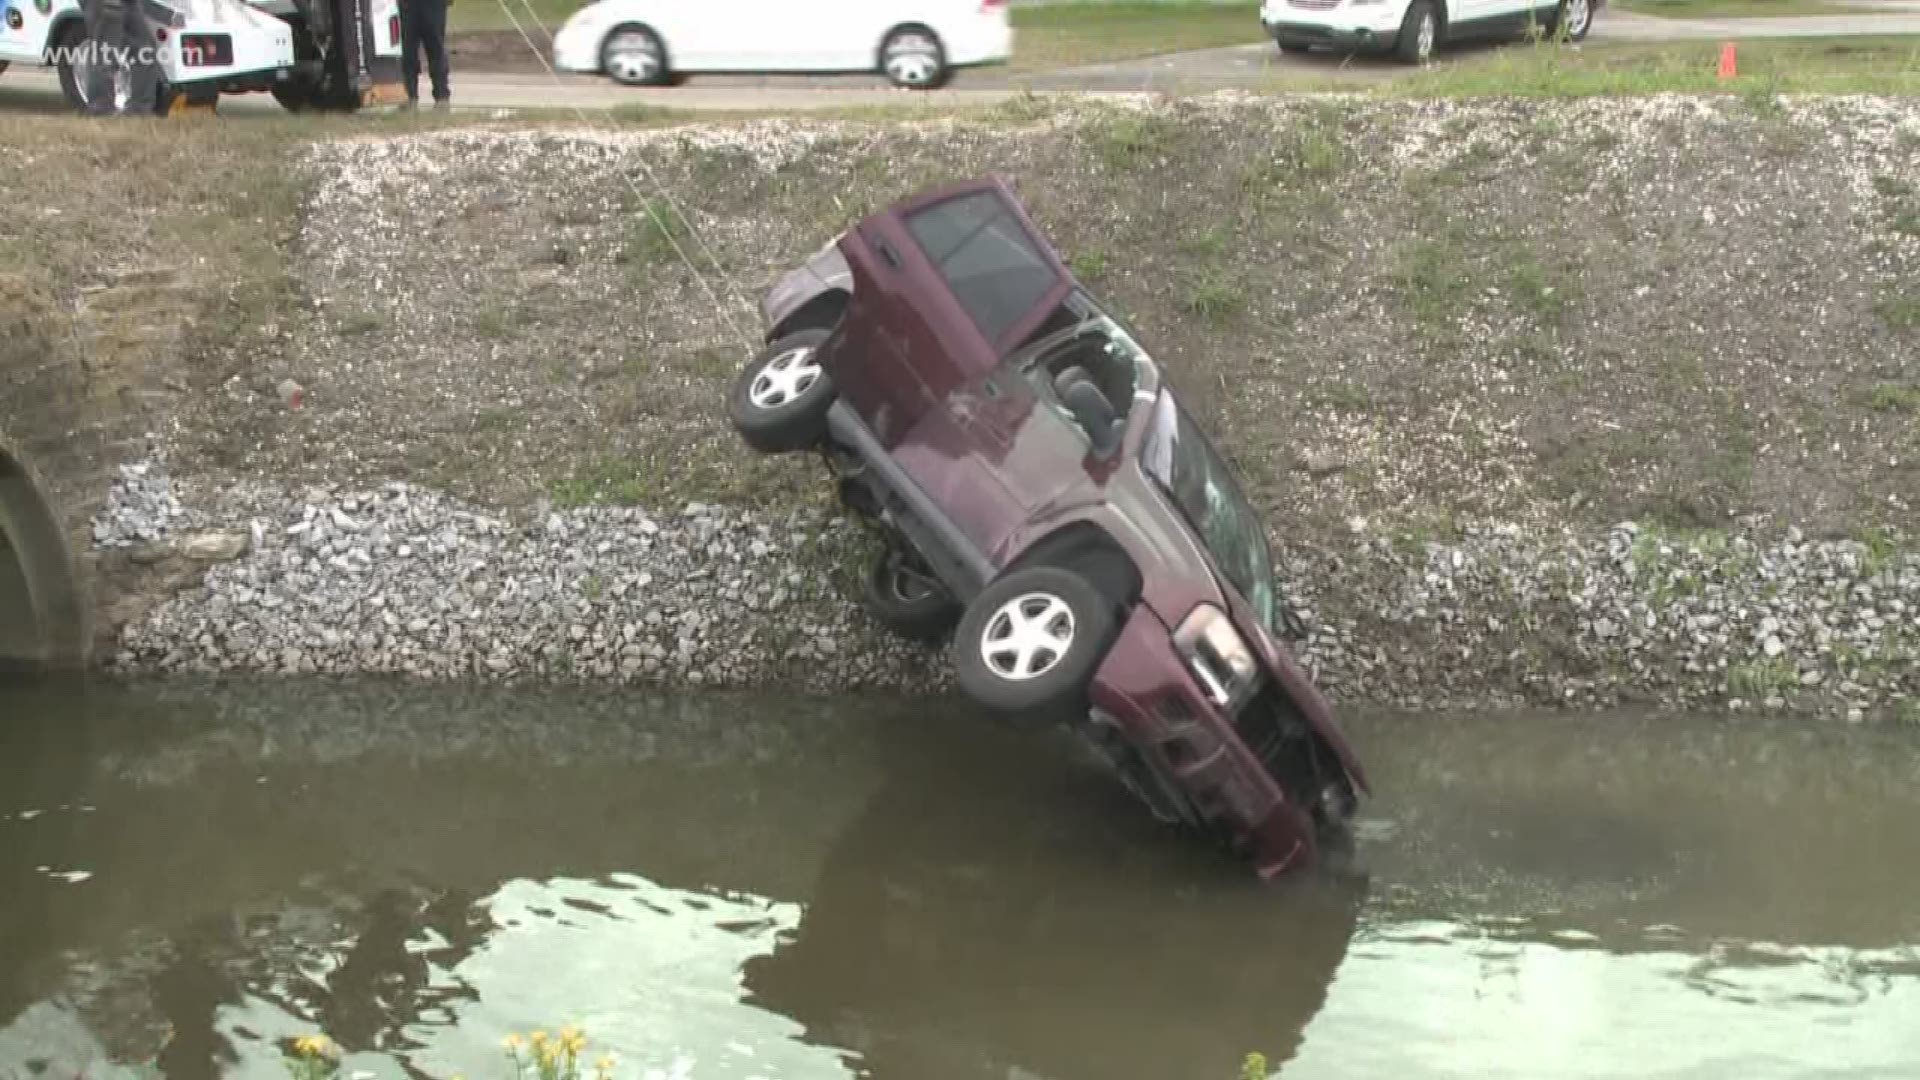 A driver was pulled out of an SUV after the vehicle crashed and turned over in a canal near the intersection of Transcontinental Drive and West Metairie Thursday morning.